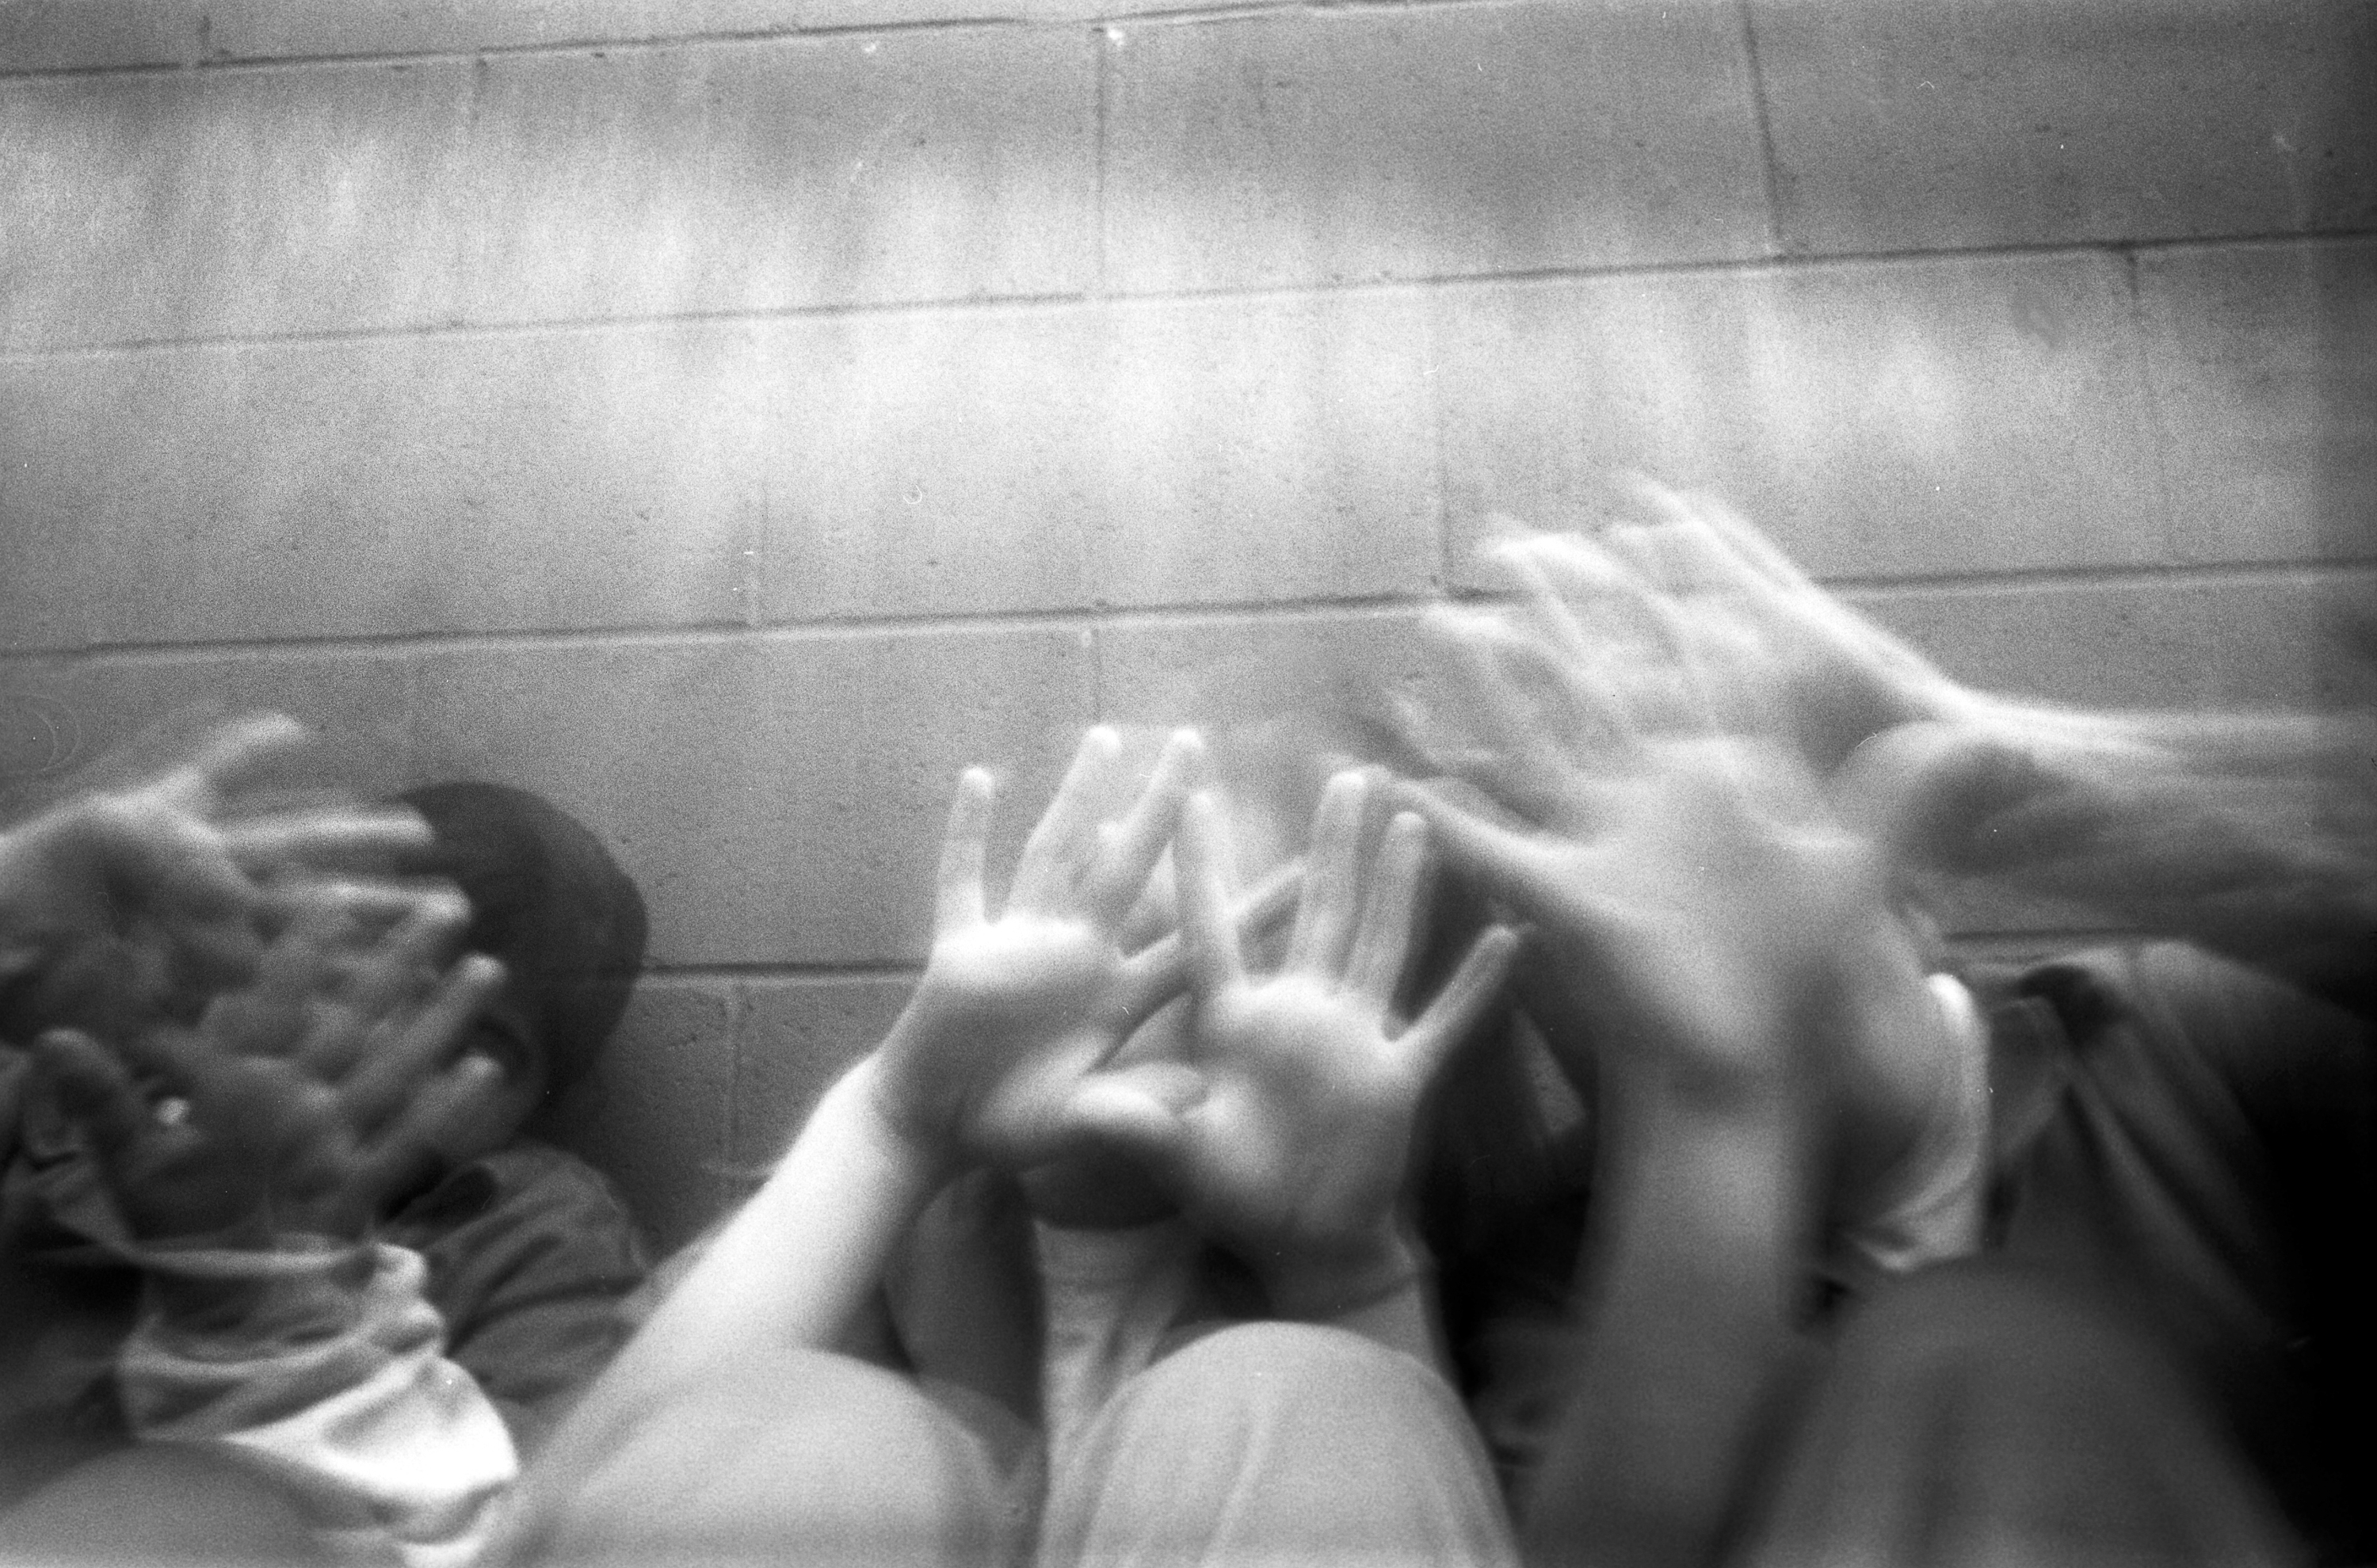 Black & white photo of girls holding hands up, obscuring their faces.